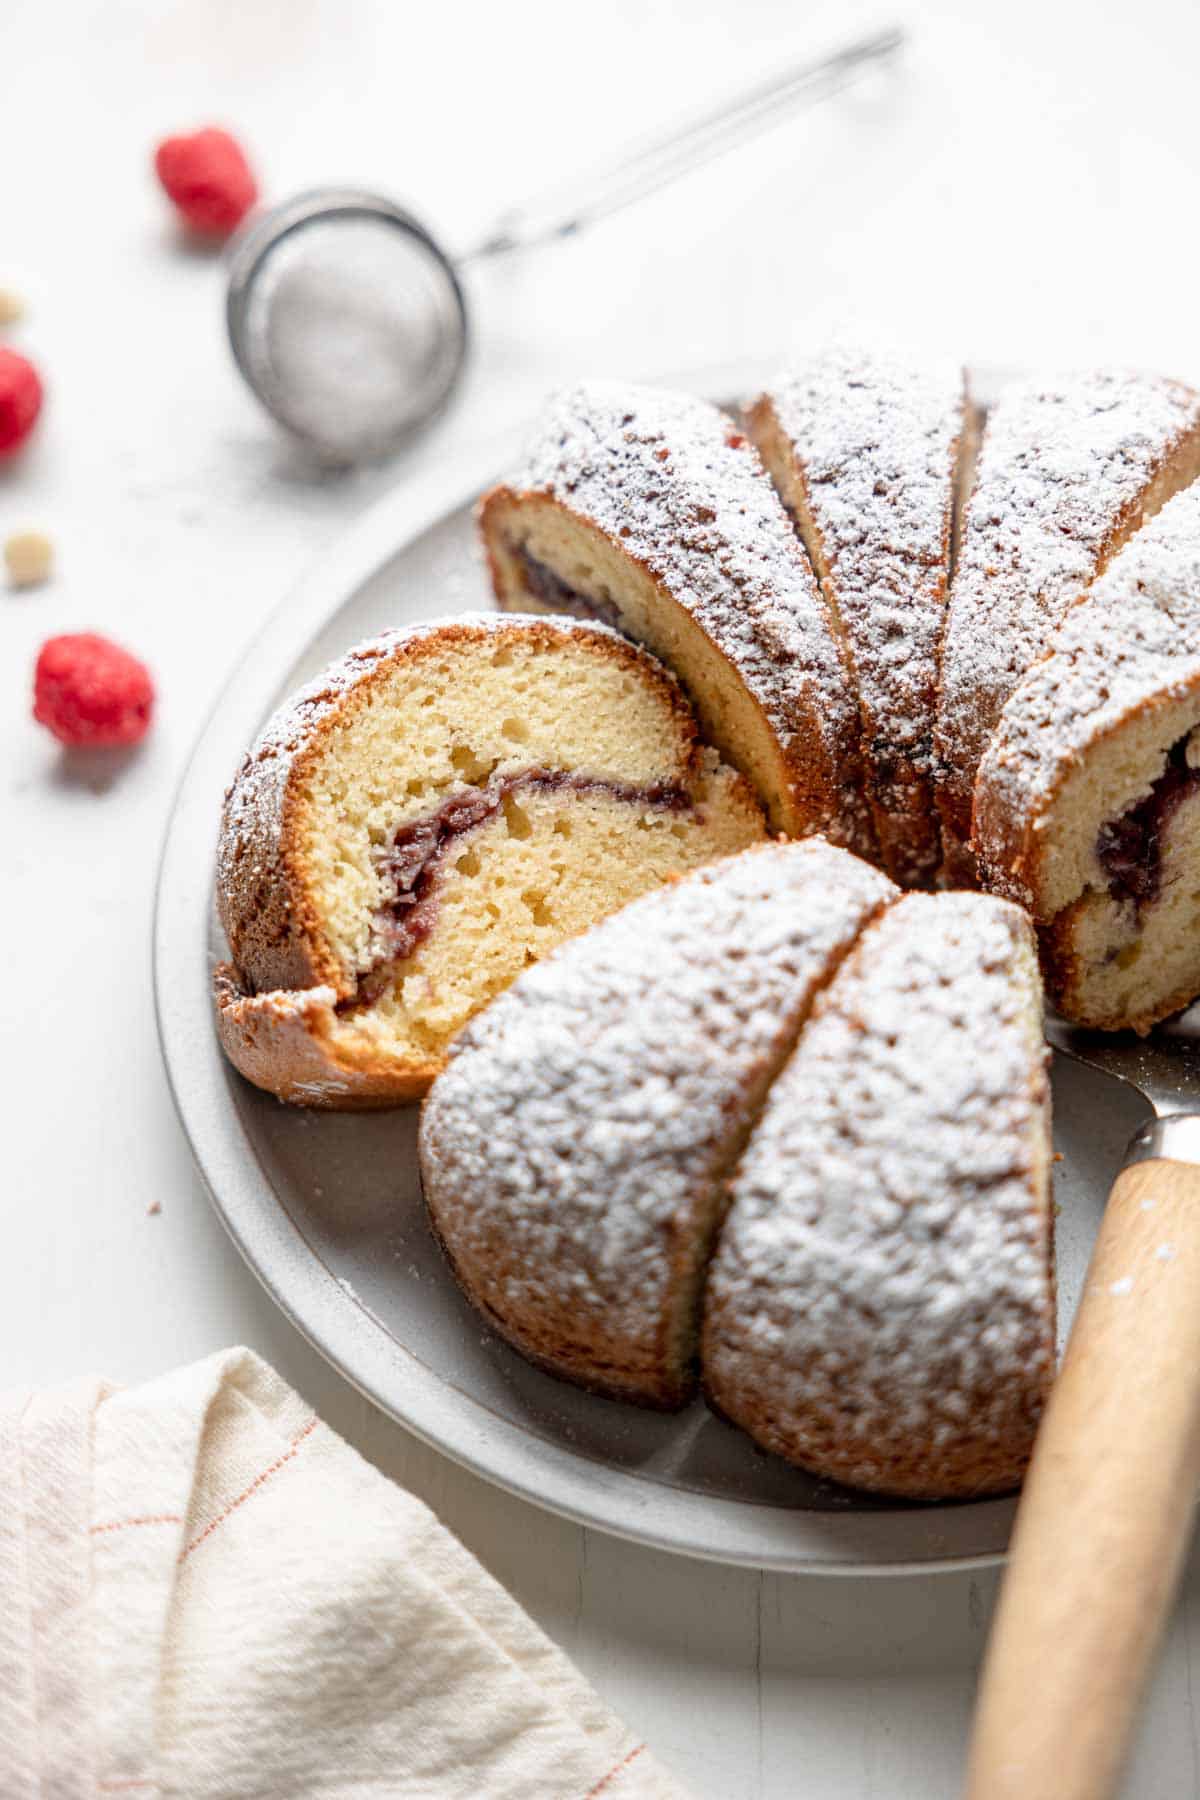 White chocolate raspberry bundt cake dusted with powdered sugar, sliced on a serving plate.